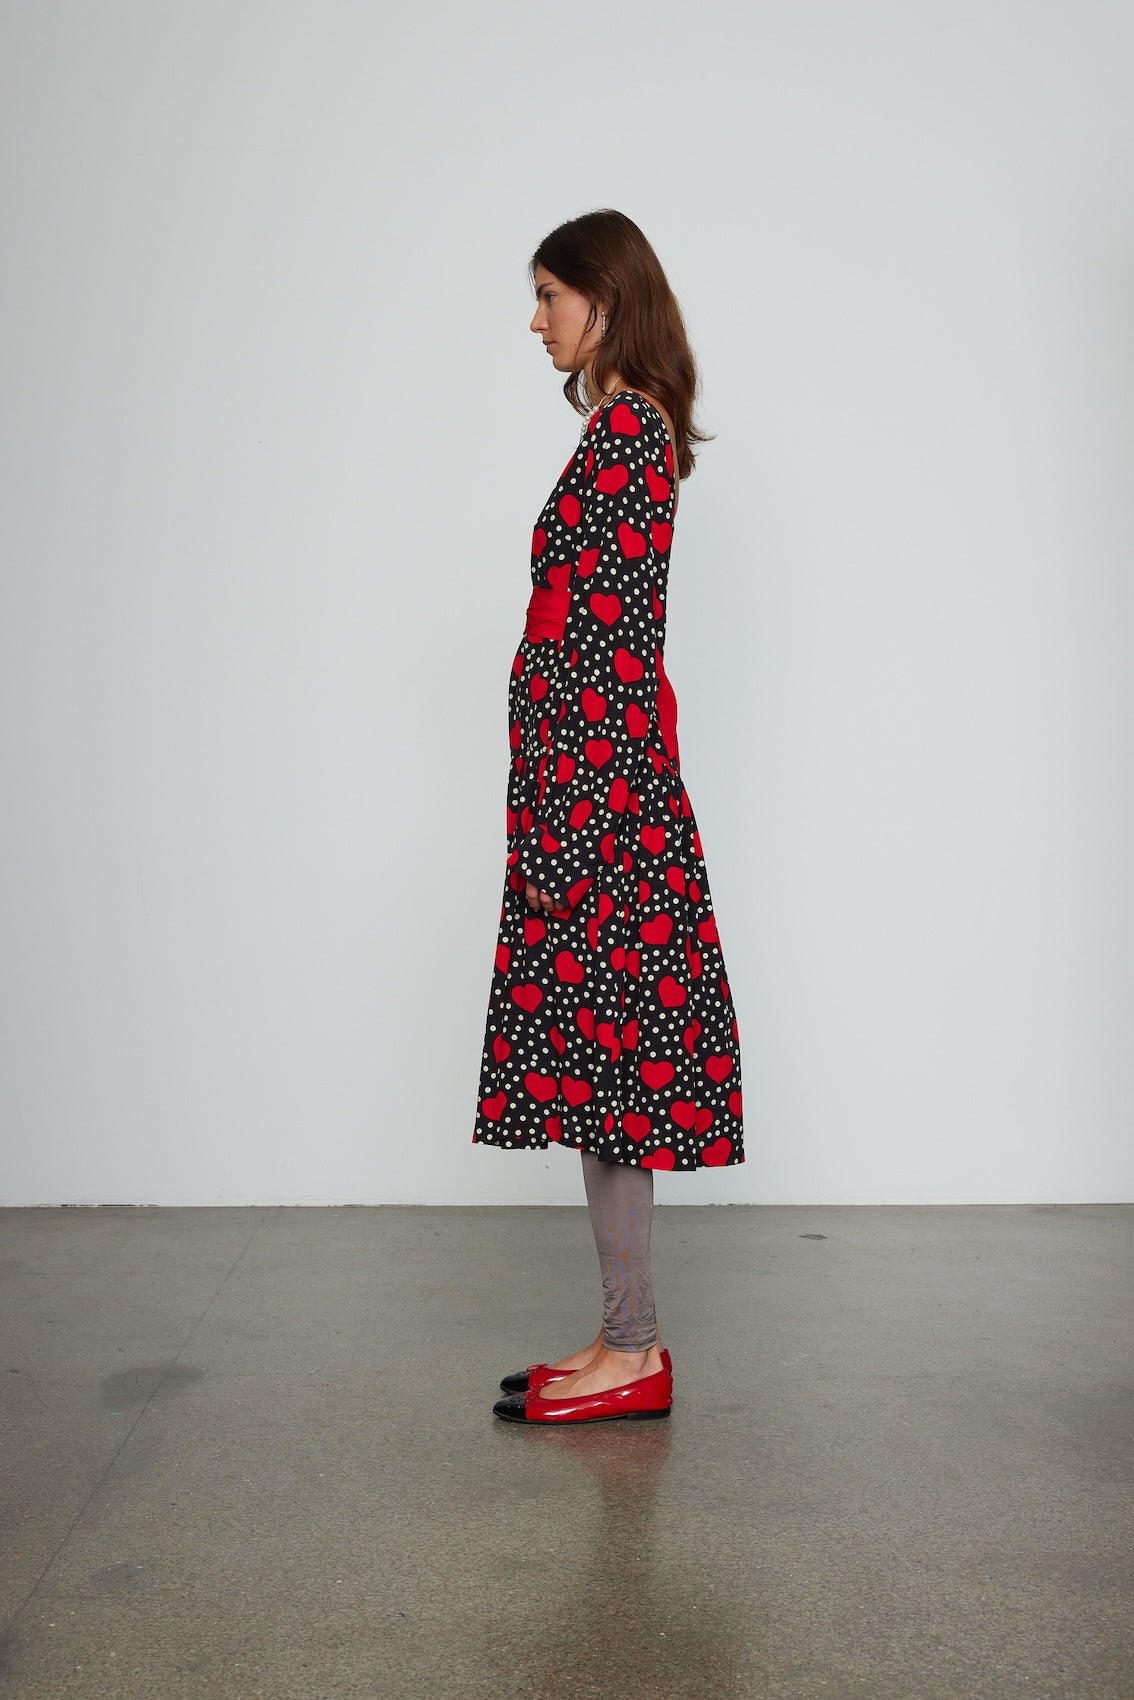 Caro Editions Holly Dress is an oversized style with a high neckline, low back with a large bow detail, and our long draped signature sleeves. The dress is made from soft silk crepe de chine featuring a heart print. Style it with an open shirt or denim jacket.